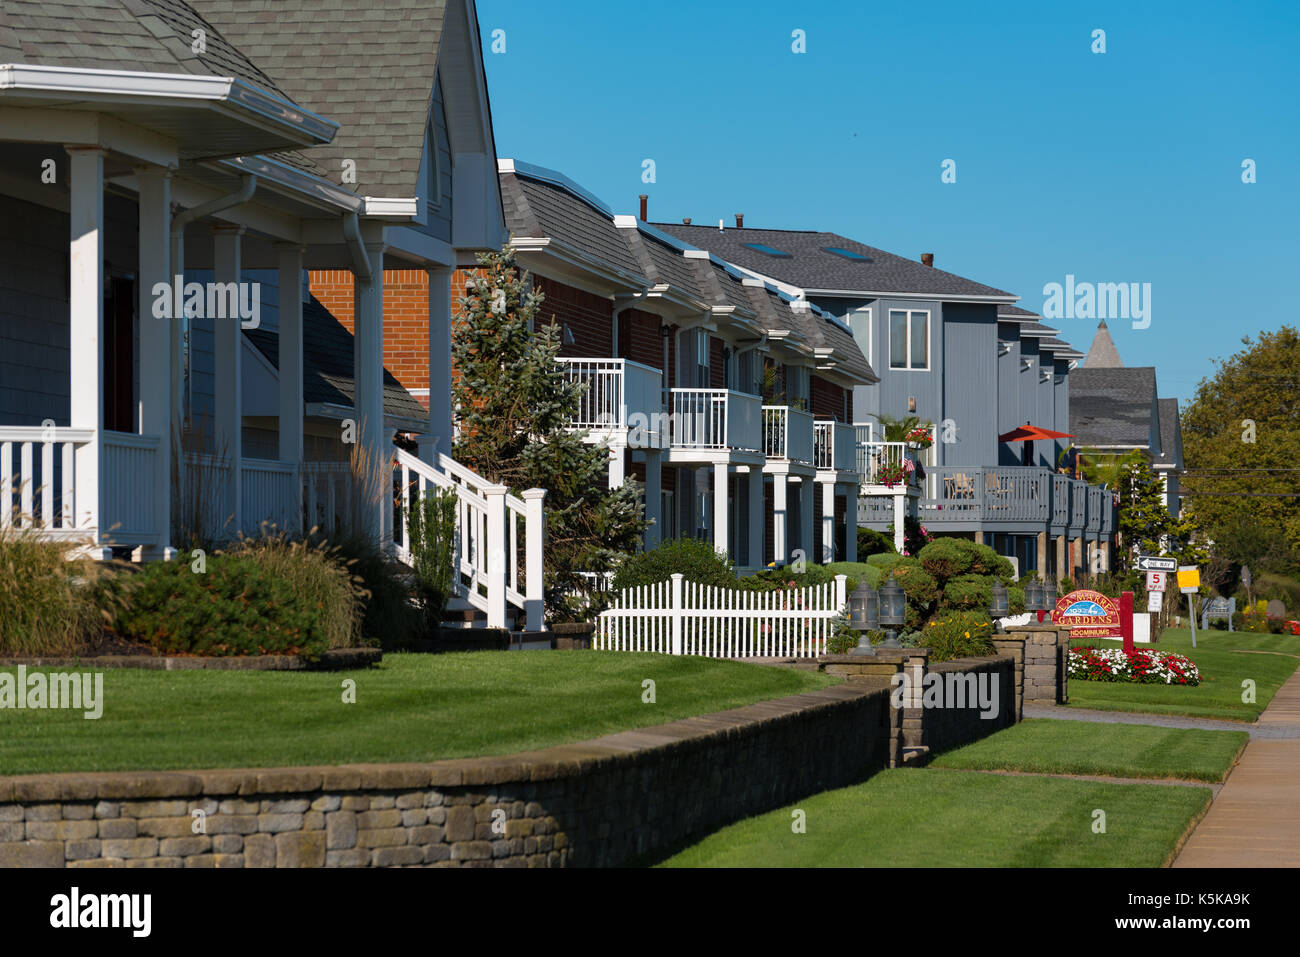 Belmar, NJ USA -- September 9, 2017 - A row of houses on a side street in Belmar, NJ. Editorial Use Only. Stock Photo